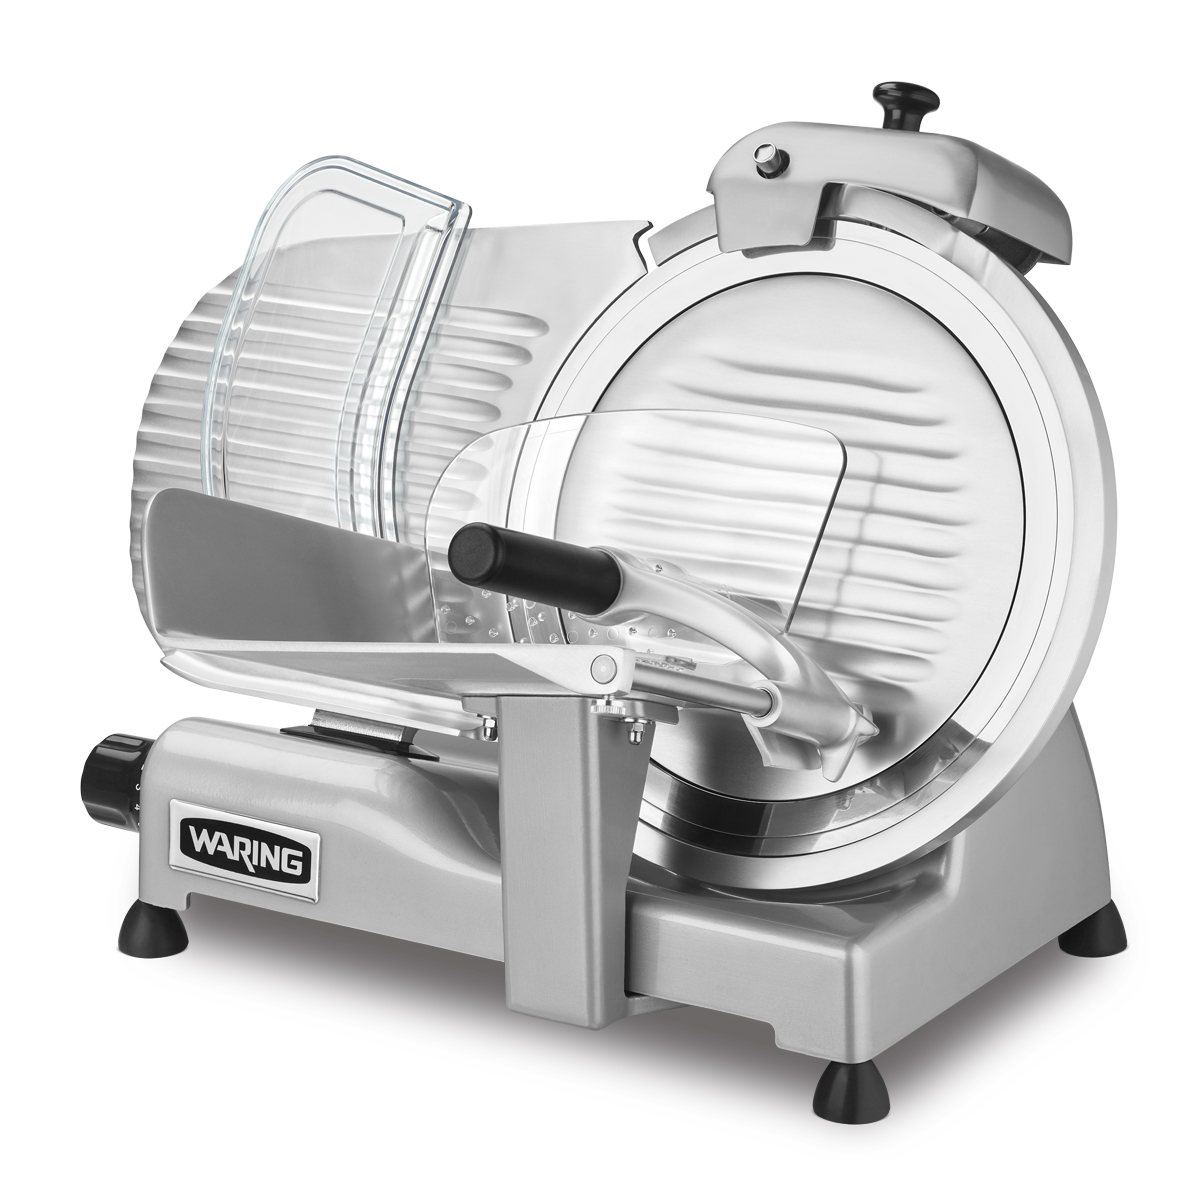 https://www.waringcommercialproducts.com/files/products/wcs300sv-professional-food-slicer-inset-1-1200x1200.jpg